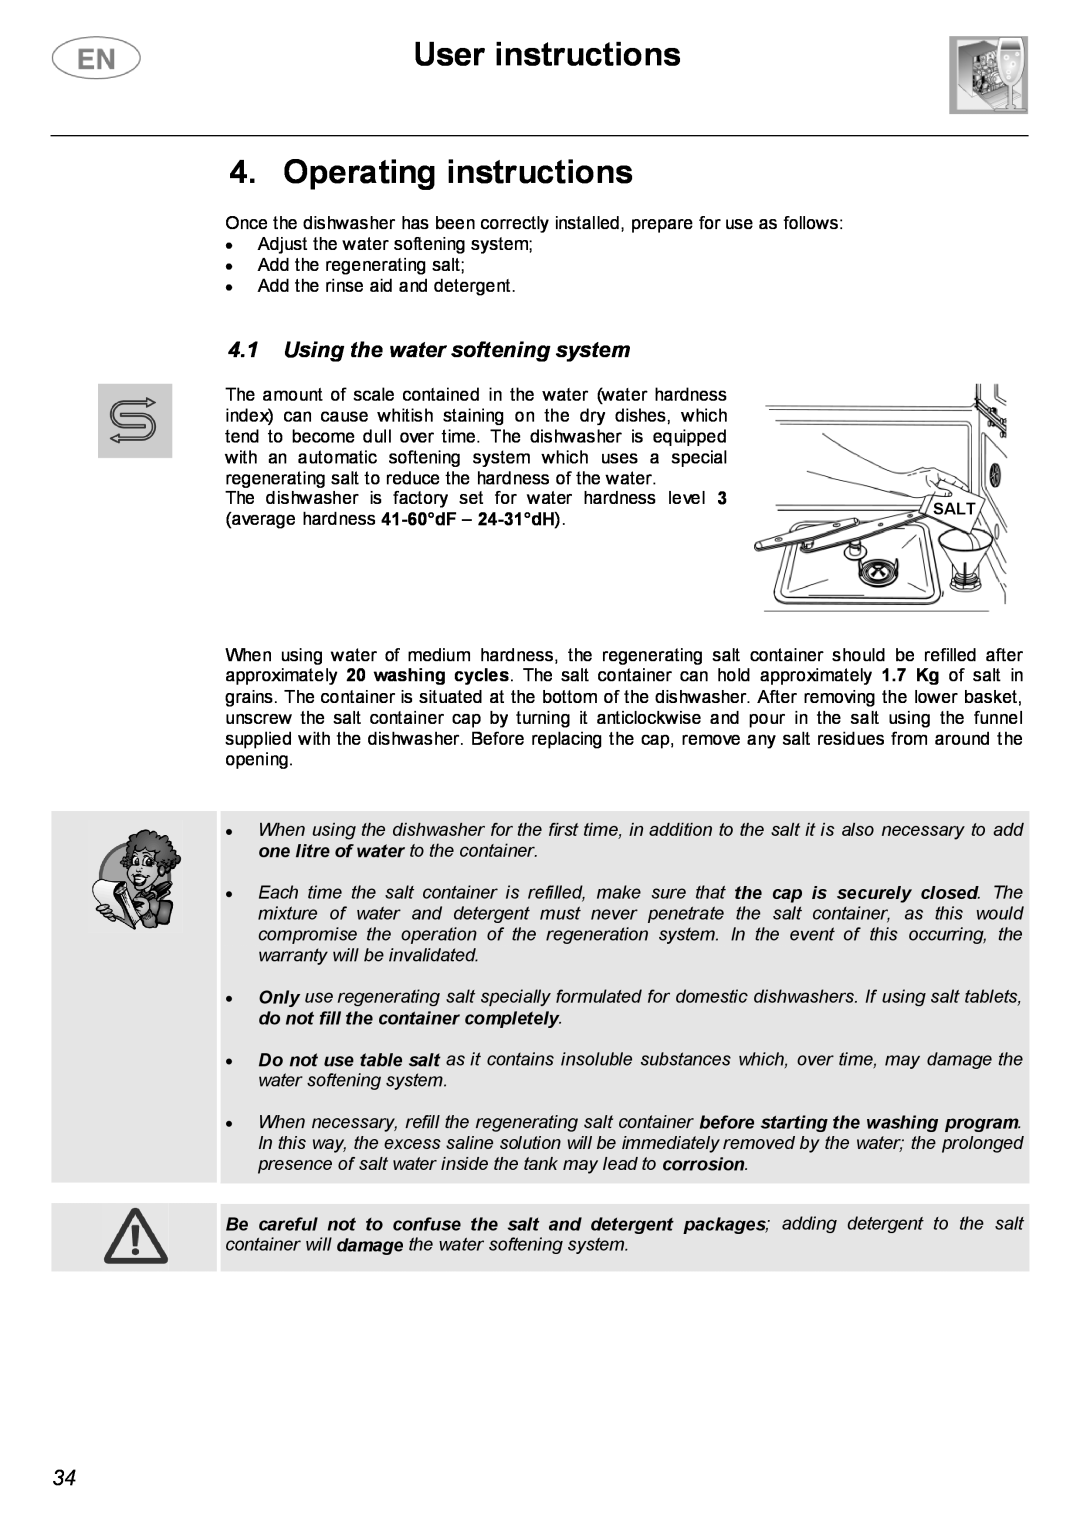 Smeg PL19K instruction manual User instructions 4. Operating instructions, Using the water softening system 